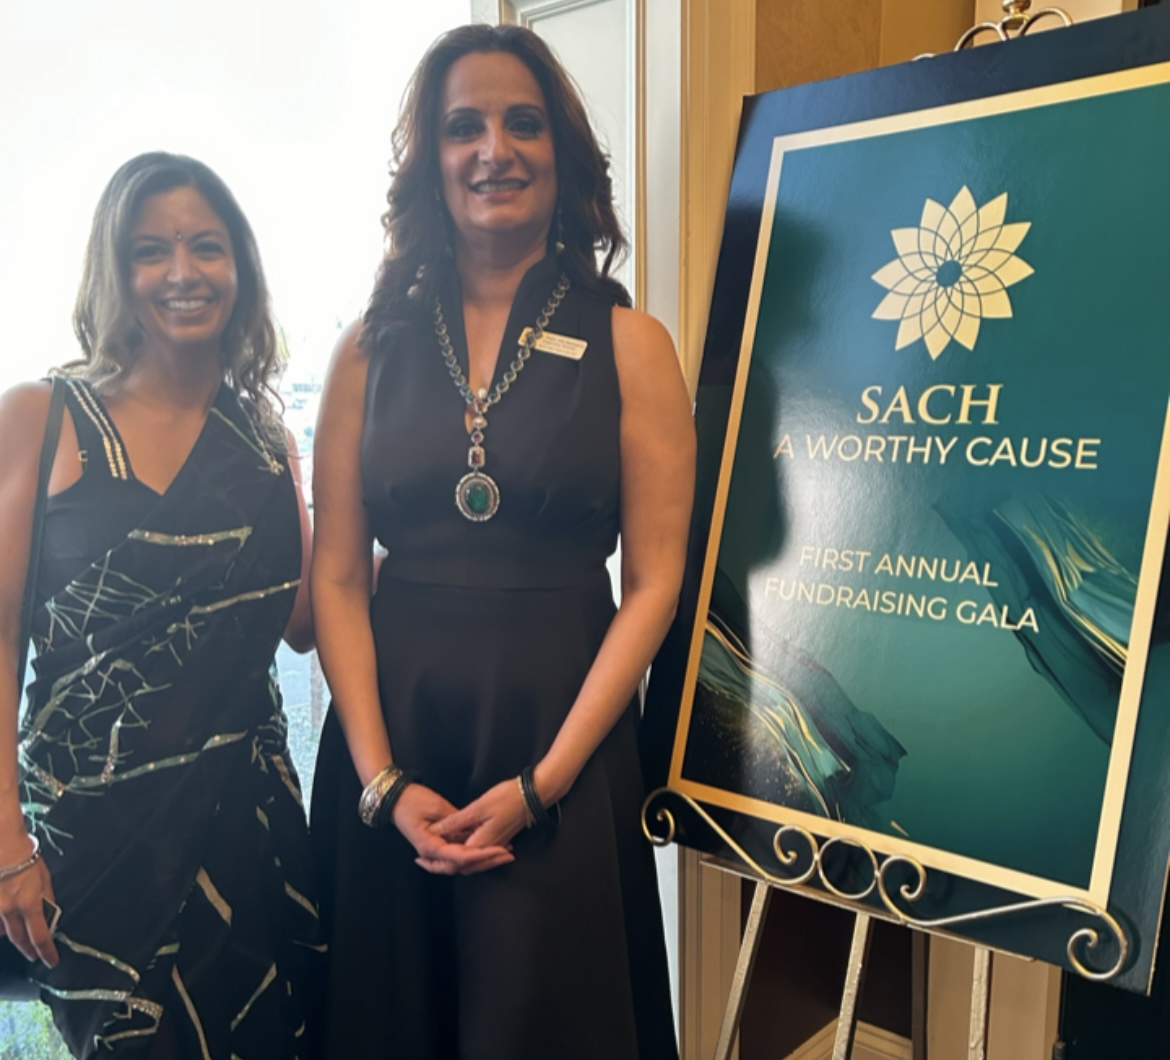 Thank you hugely @DGillBadesha @Pandher4Burnaby & @sach_bc for a fantastic fundraiser & for the life-giving work the SACH team is doing on the ground everyday. It was such a joy to connect with like-minded-hearted humans yesterday! @ohana_annie @RachnaSinghNDP @shervansociety